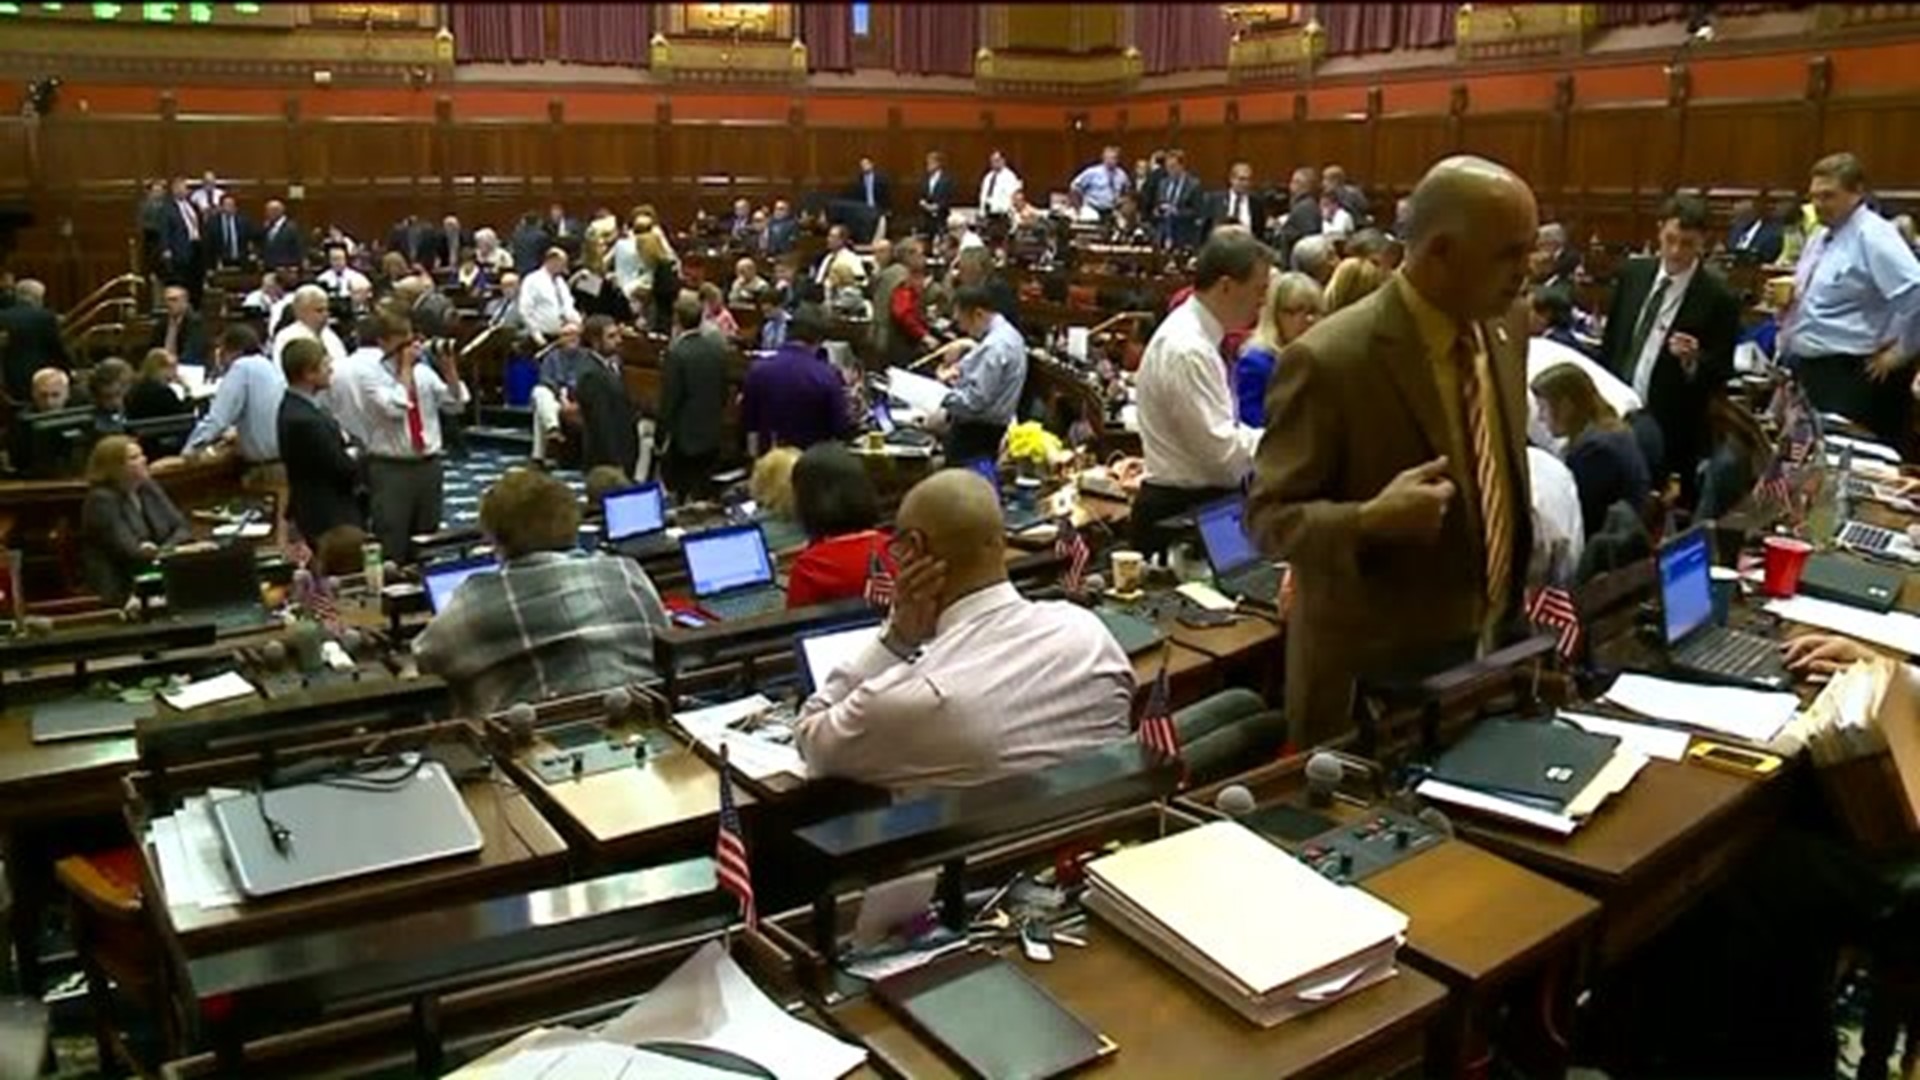 Lawmakers continue negotiations on legislation, budget on last day of session